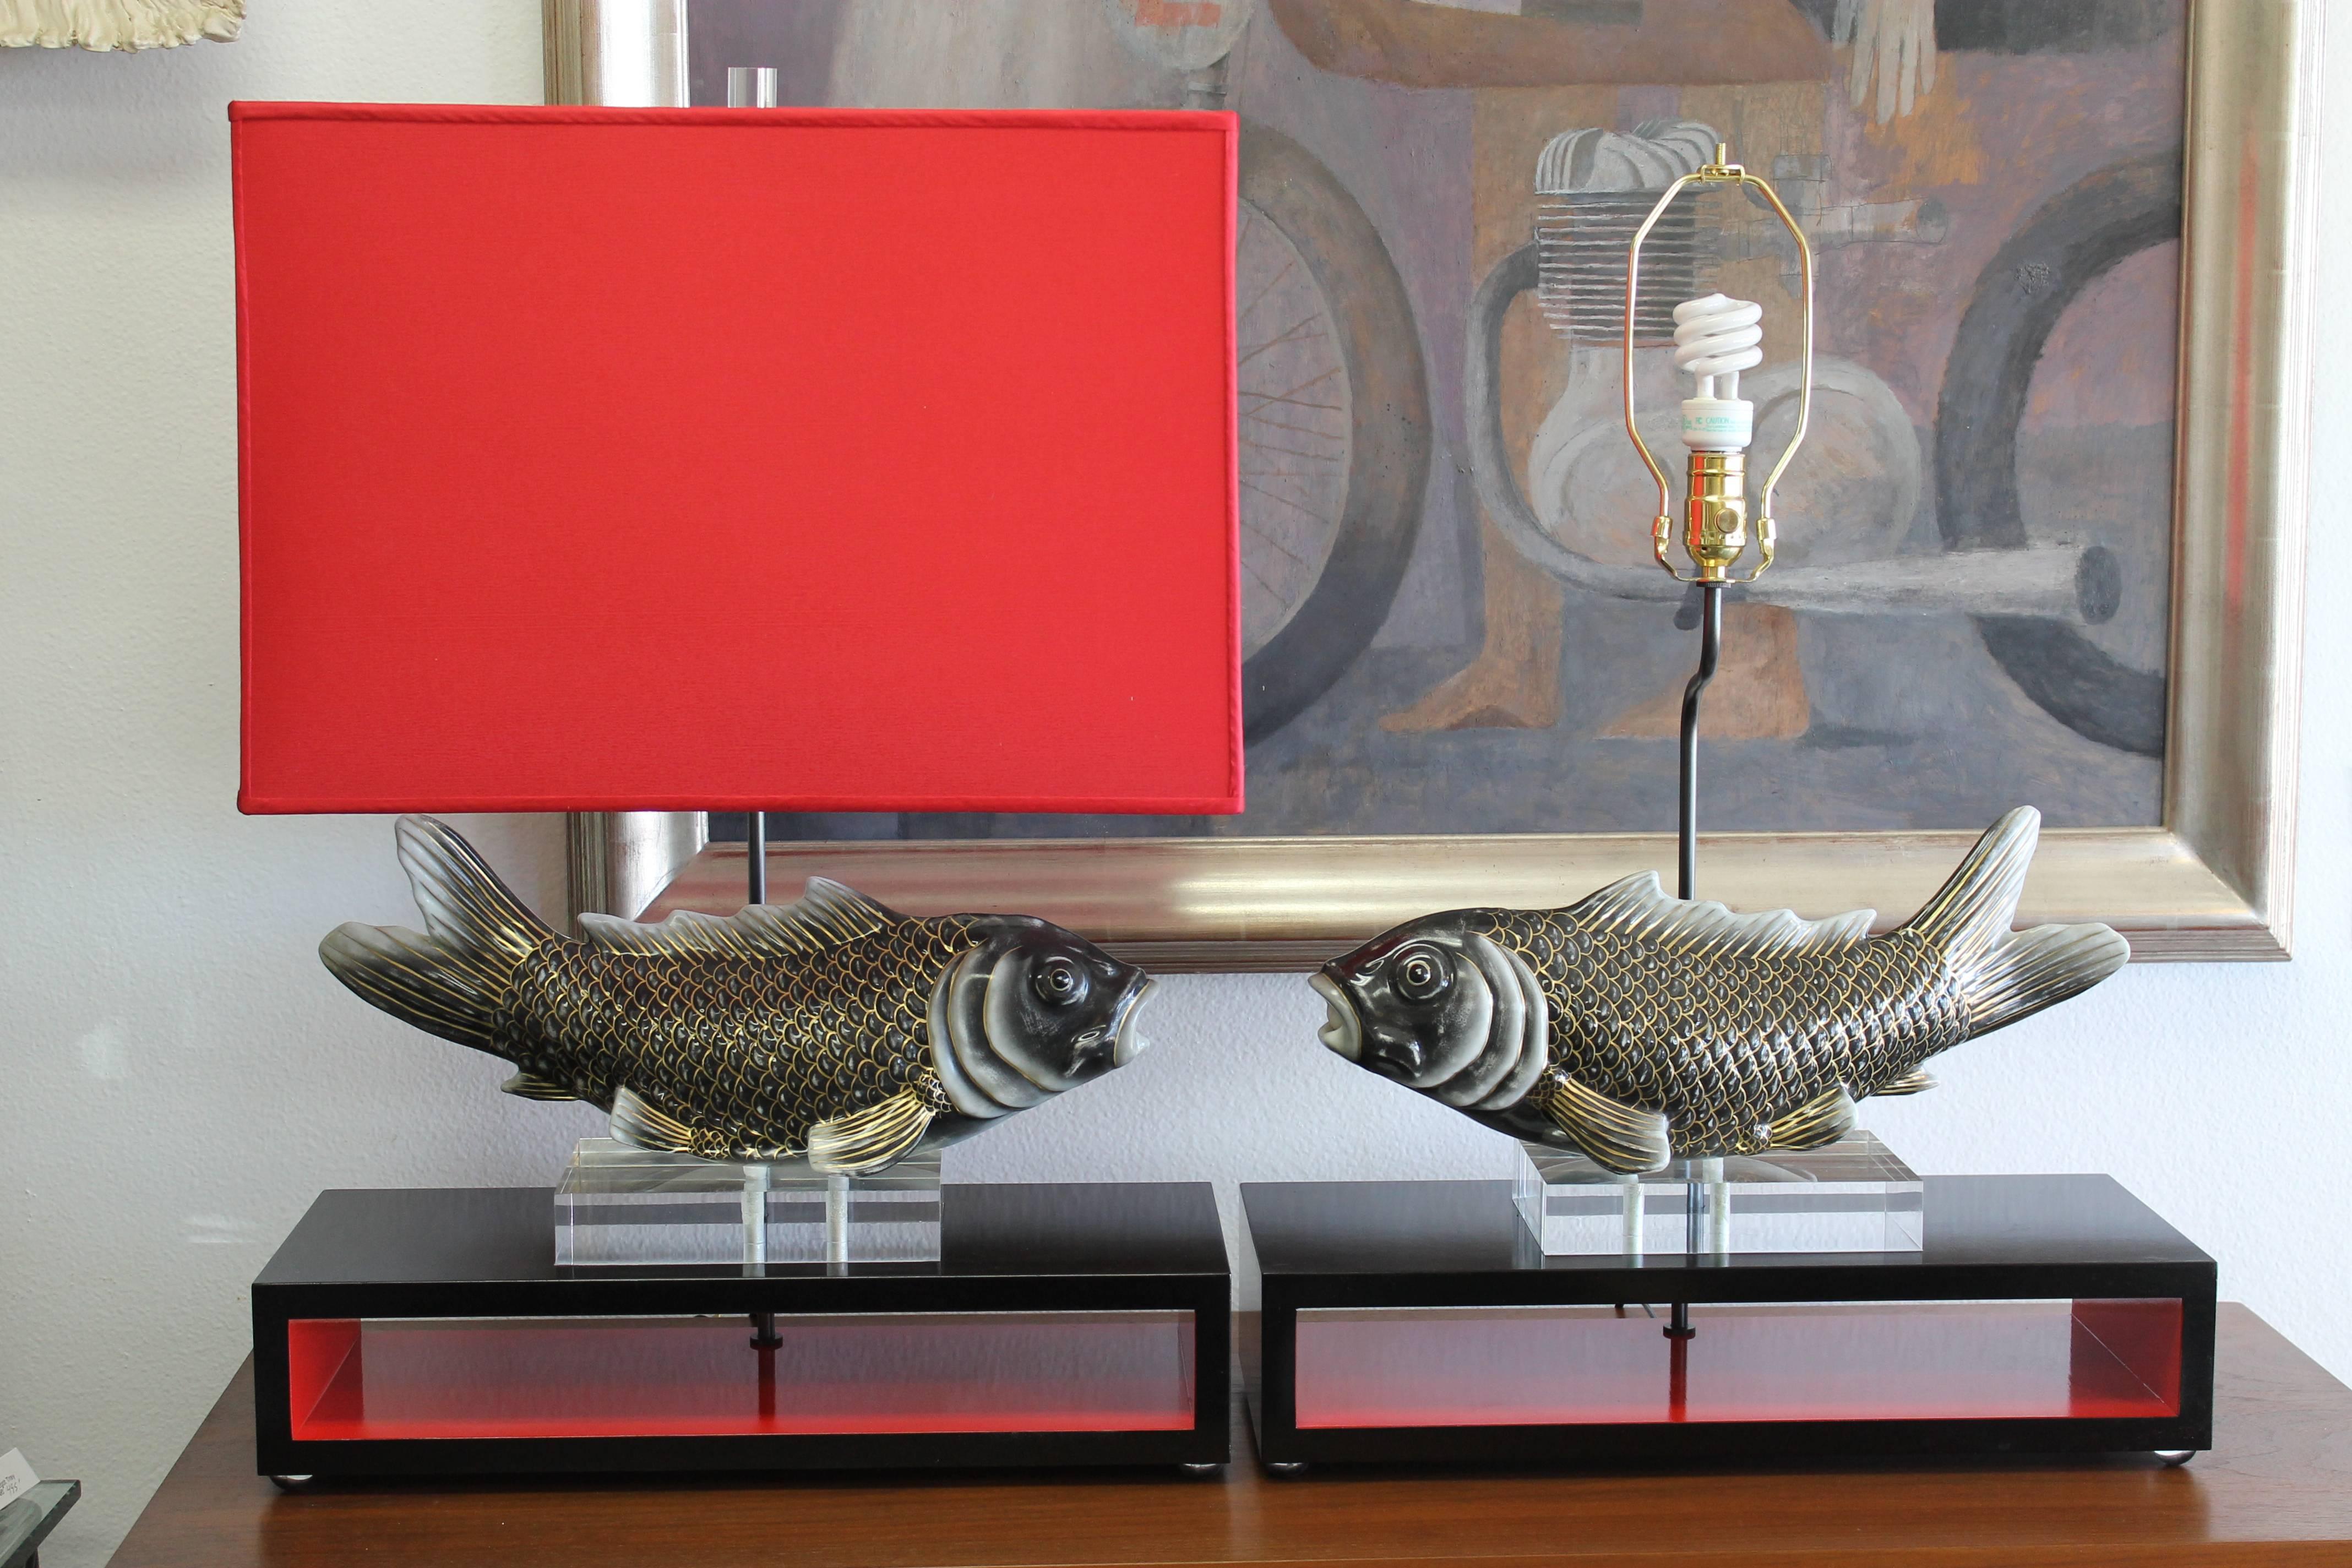 Pair of beautiful custom designed koi lamps with red lamp shades.  The black lacquer base is 20